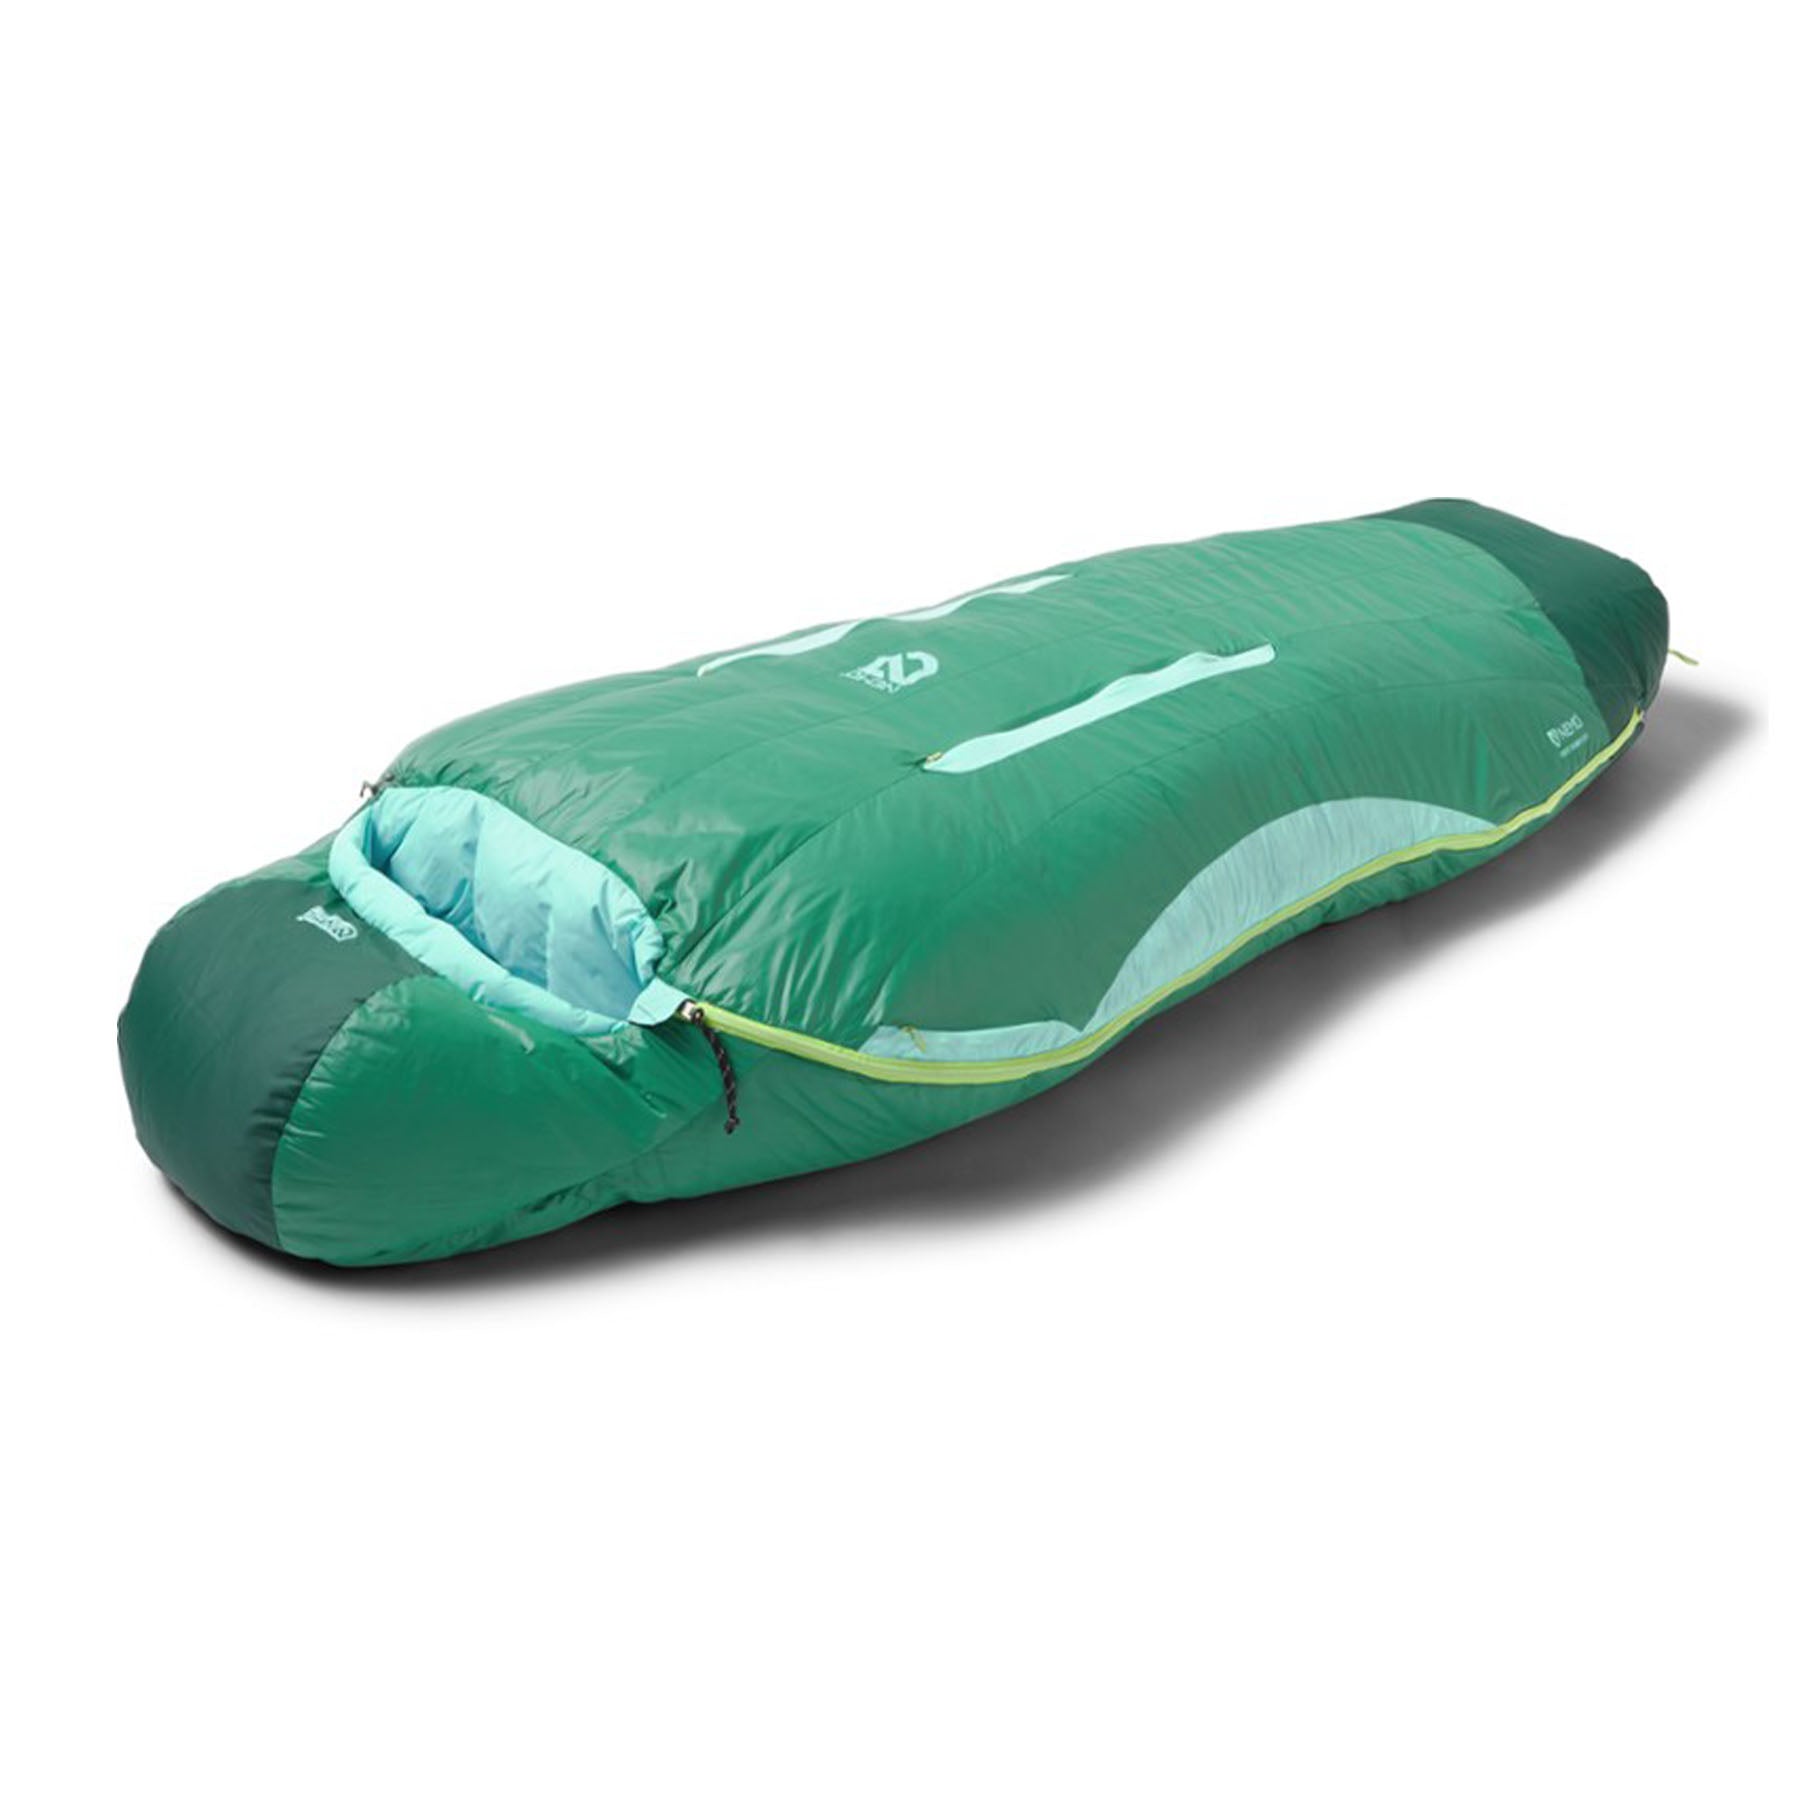 Hero image featuring a side angle view of a fully zipped Nemo Women's Disco 30 degree sleeping bag in celestial moonglade